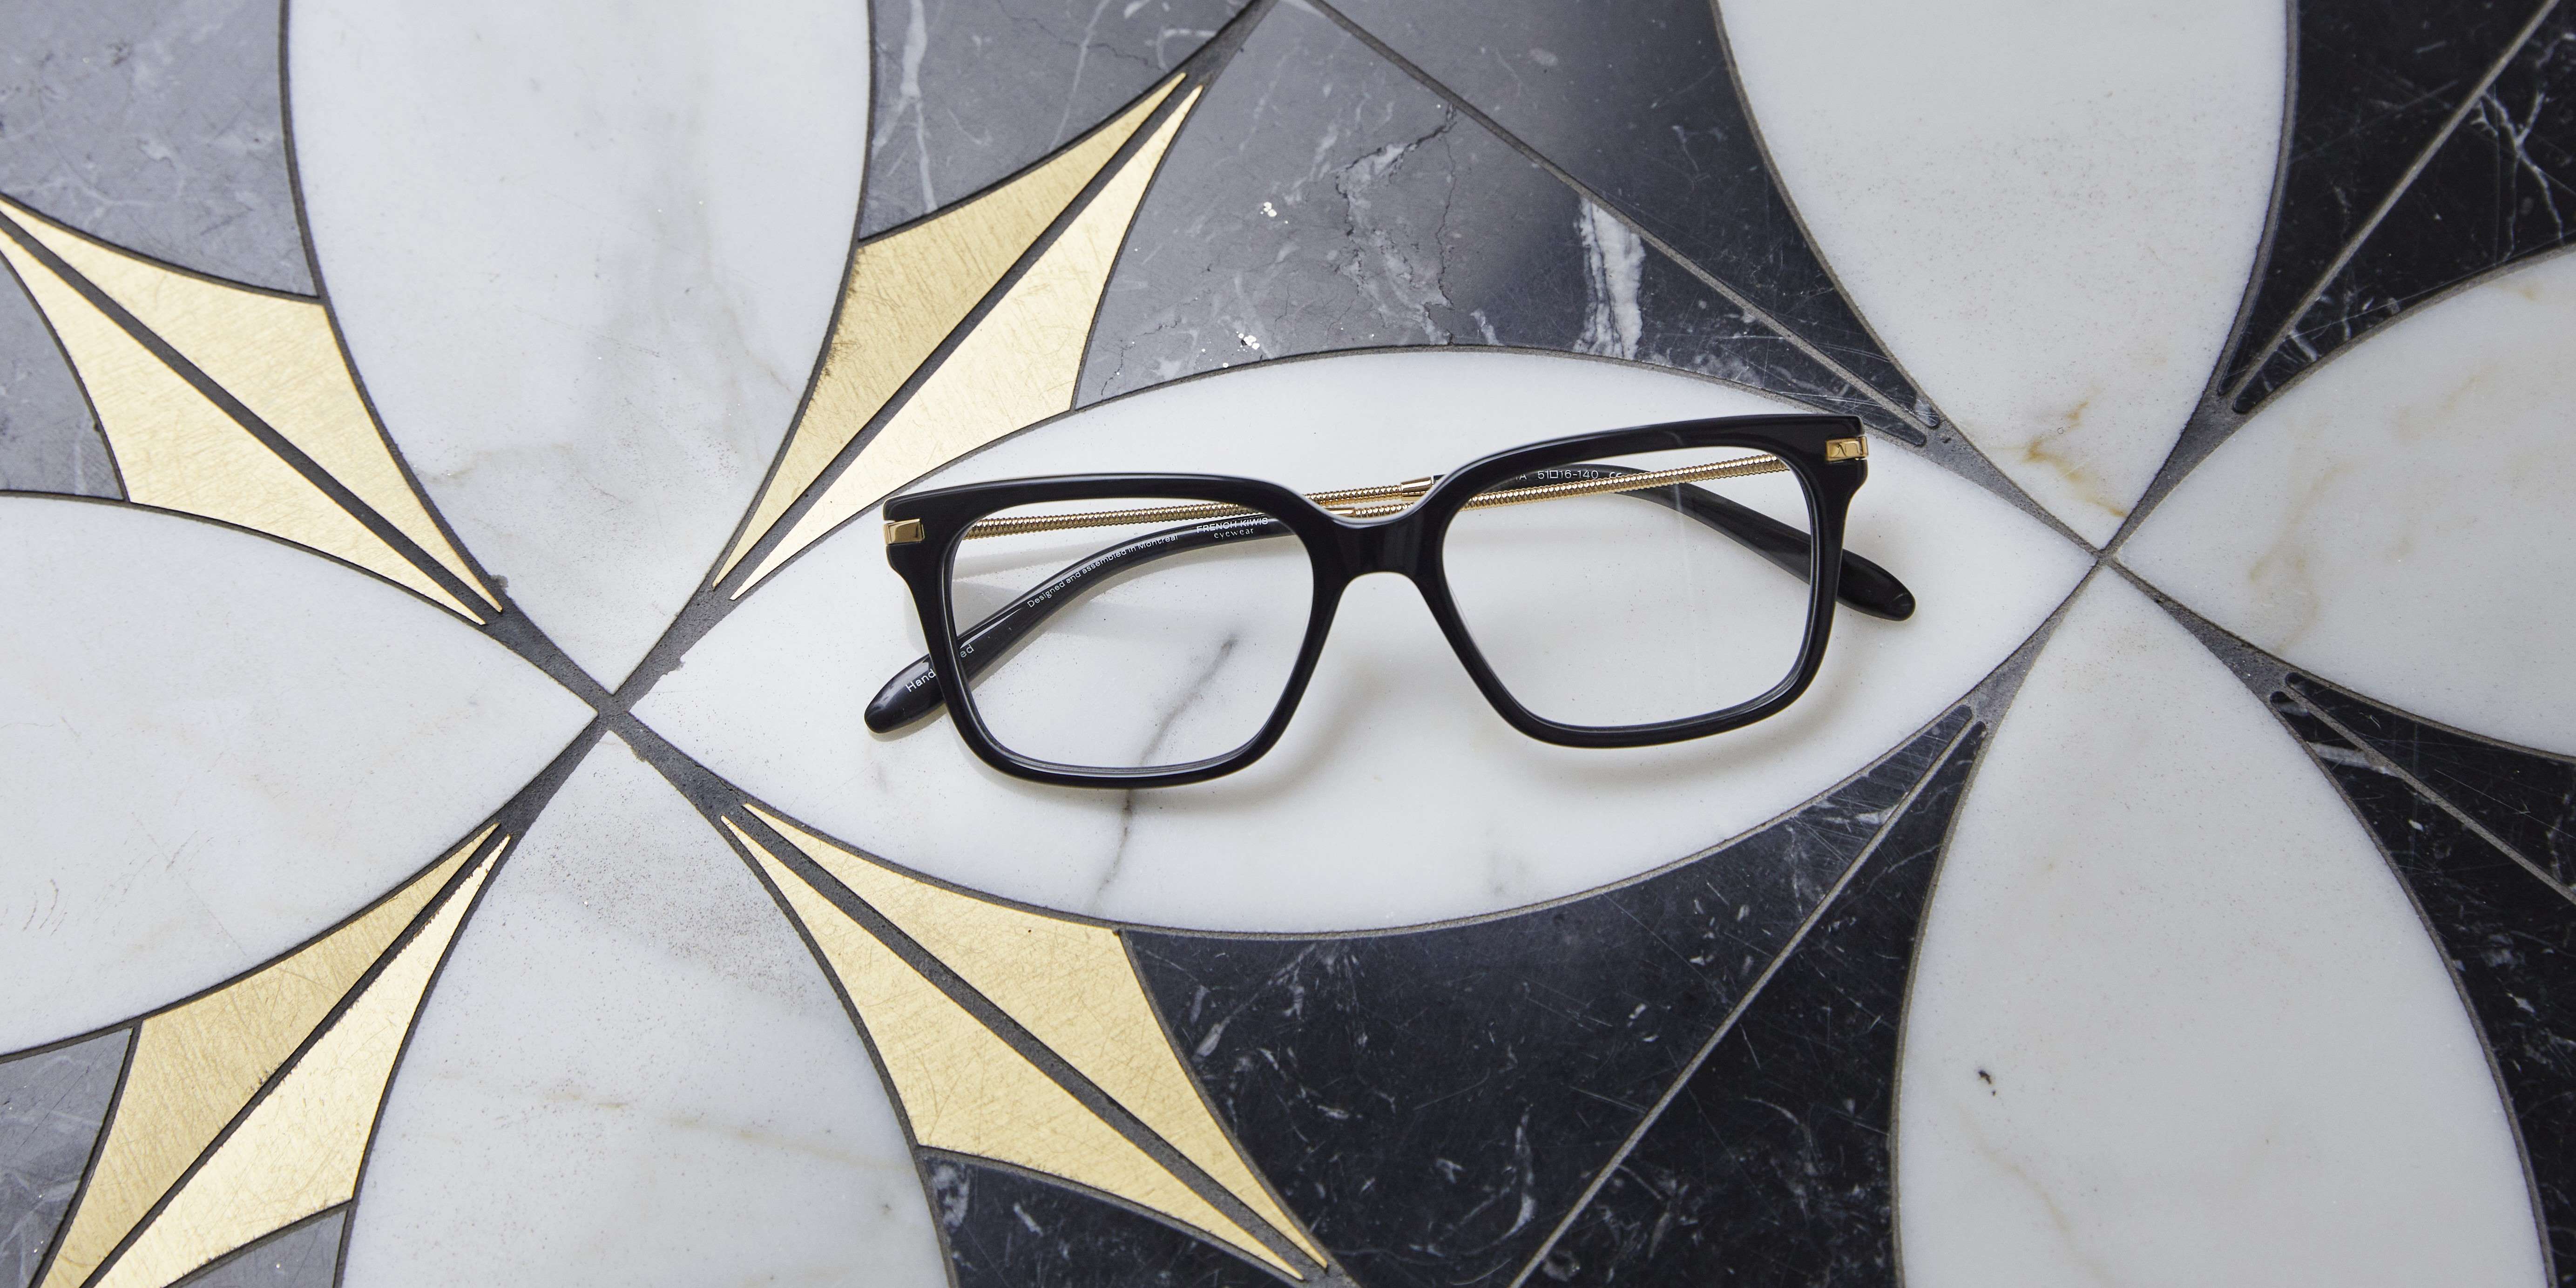 Photo Details of Sasha Caramel Marble Reading Glasses in a room